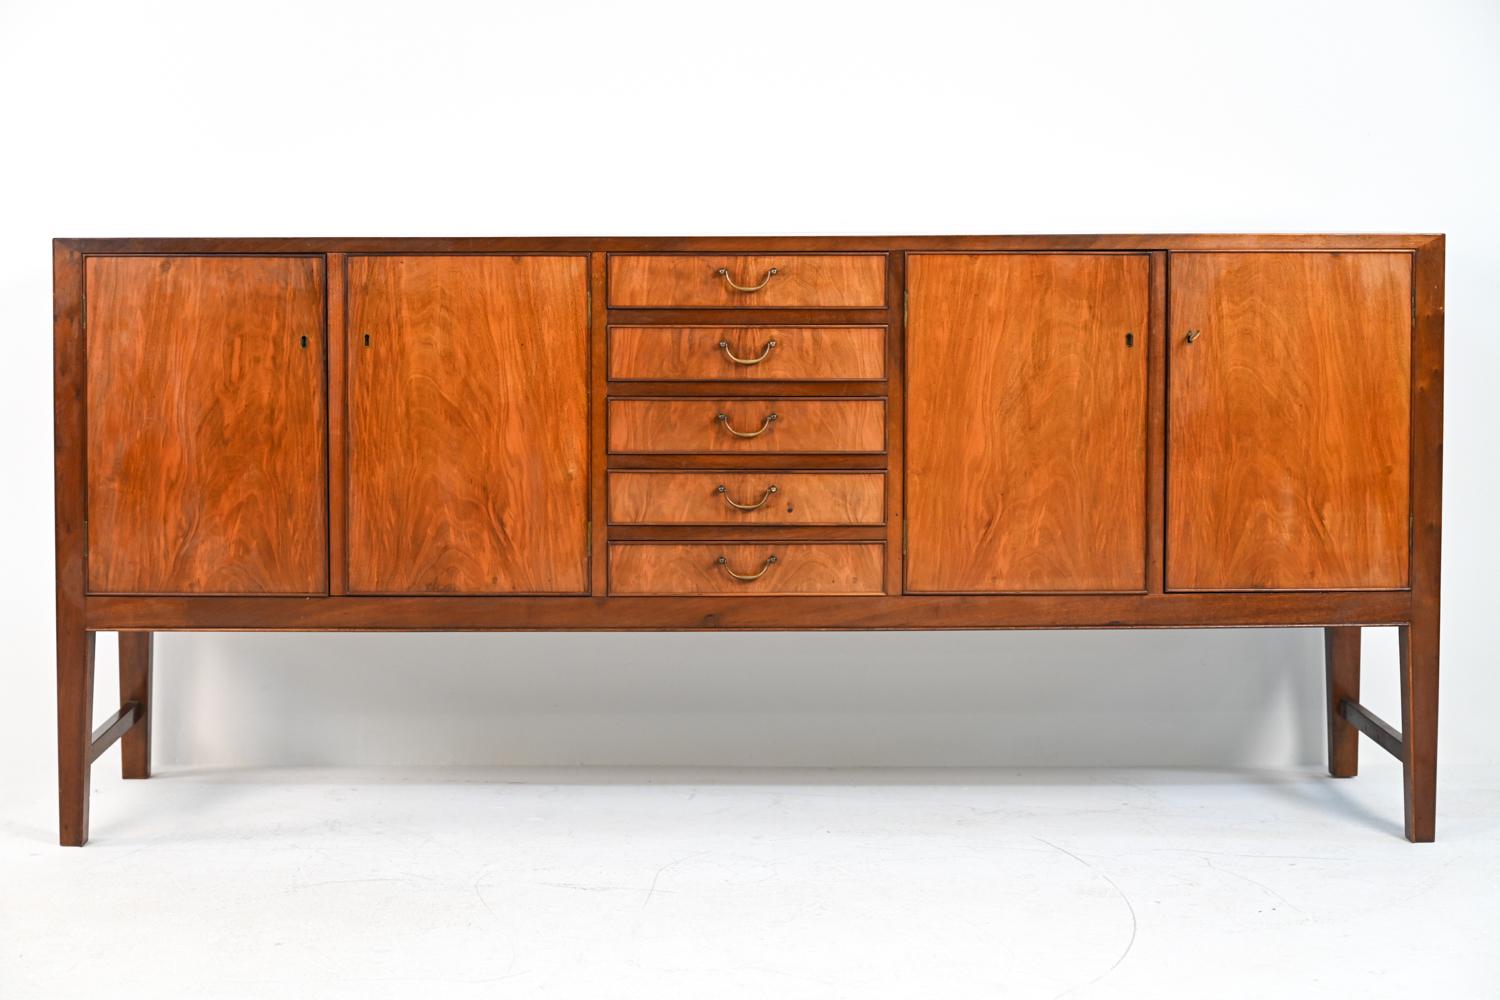 This gorgeous credenza or sideboard features beautifully a figured Cuban mahogany exterior and solid blonde wood interiors, with five dovetailed drawers and two cupboards with adjustable shelves. Gently rounded edges, half-round trim, and elegant